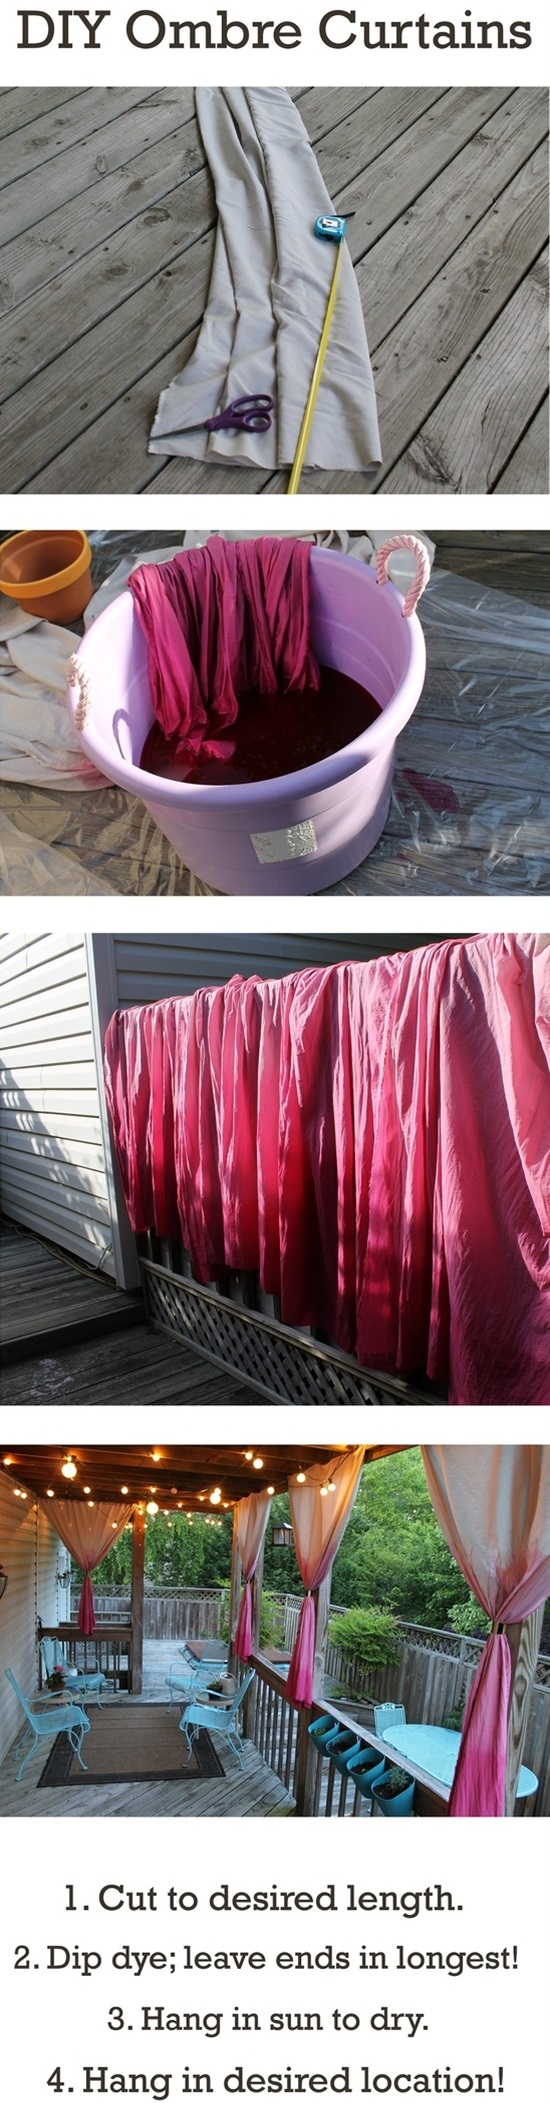 DIY-Ombre-Curtains-1